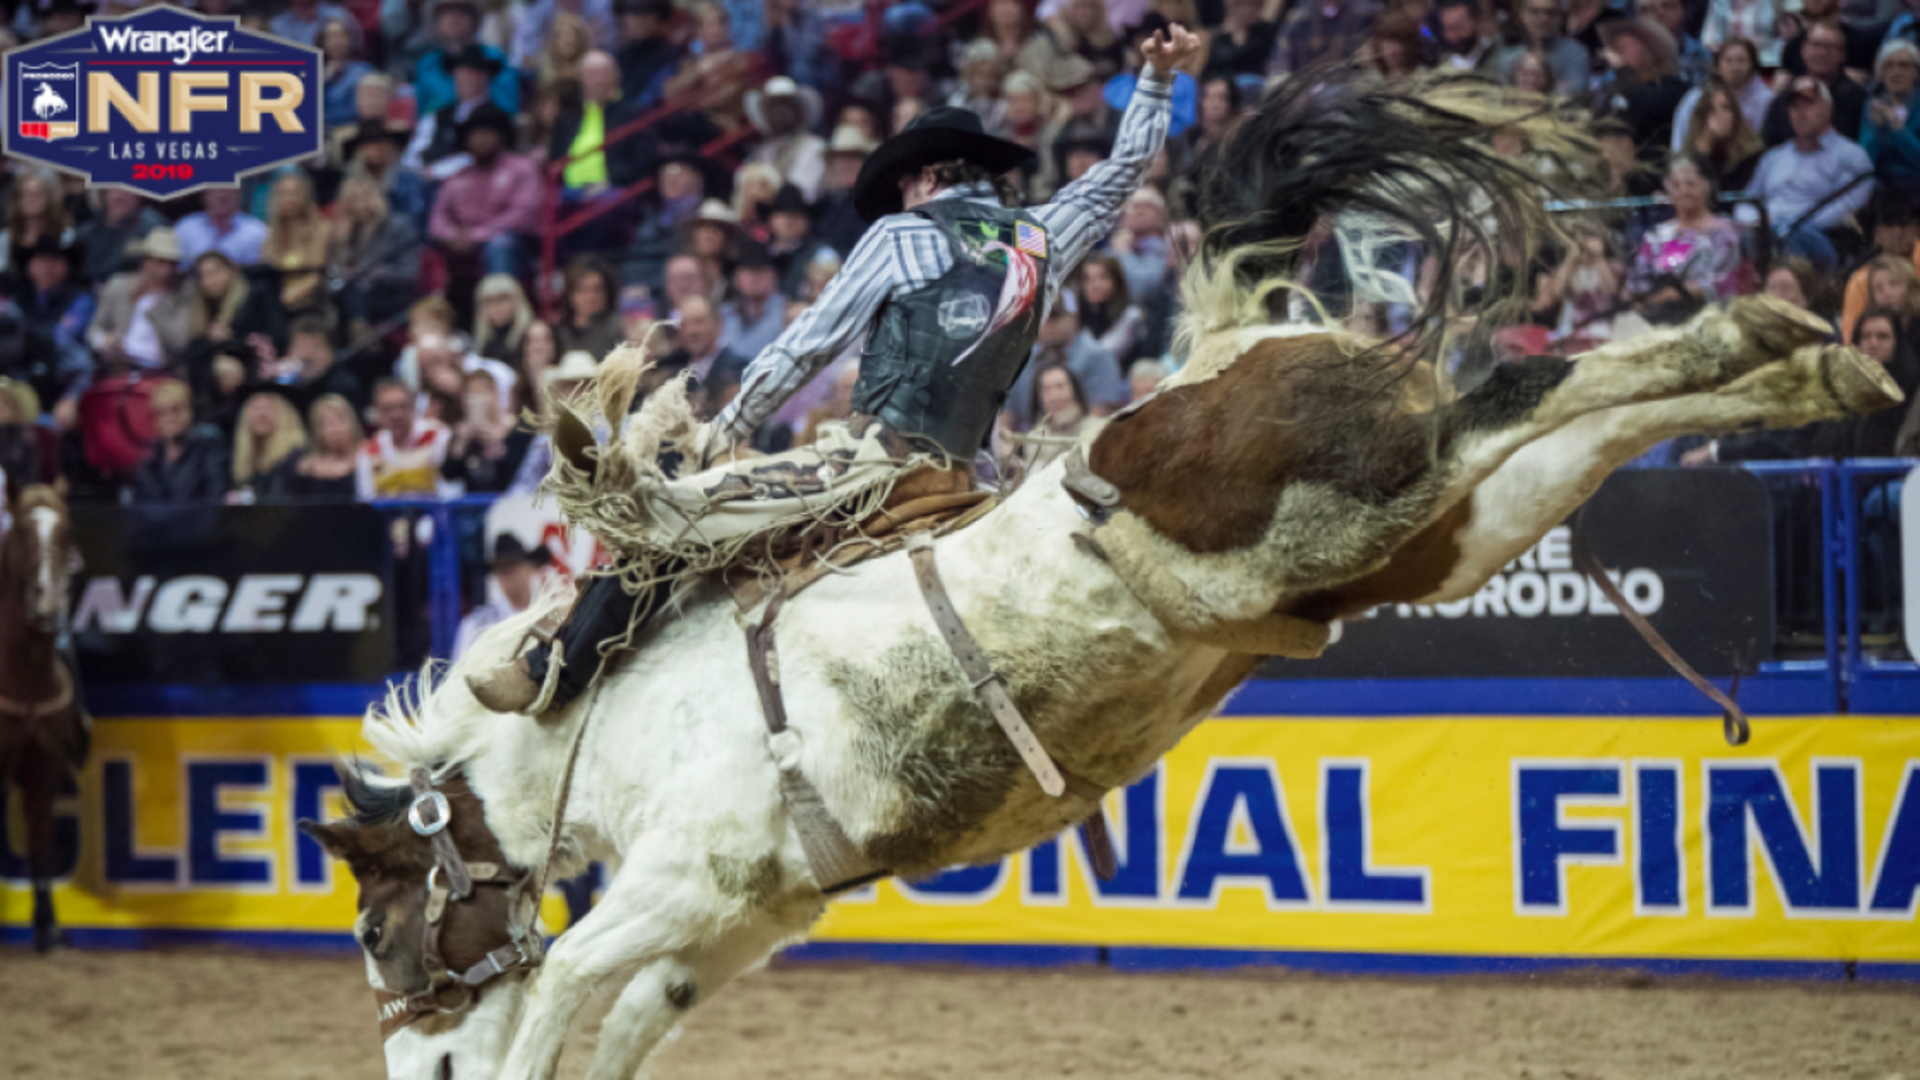 Las Vegas Events and PRCA Agree on Extension to Keep Wrangler NFR in Las Vegas Through 2035